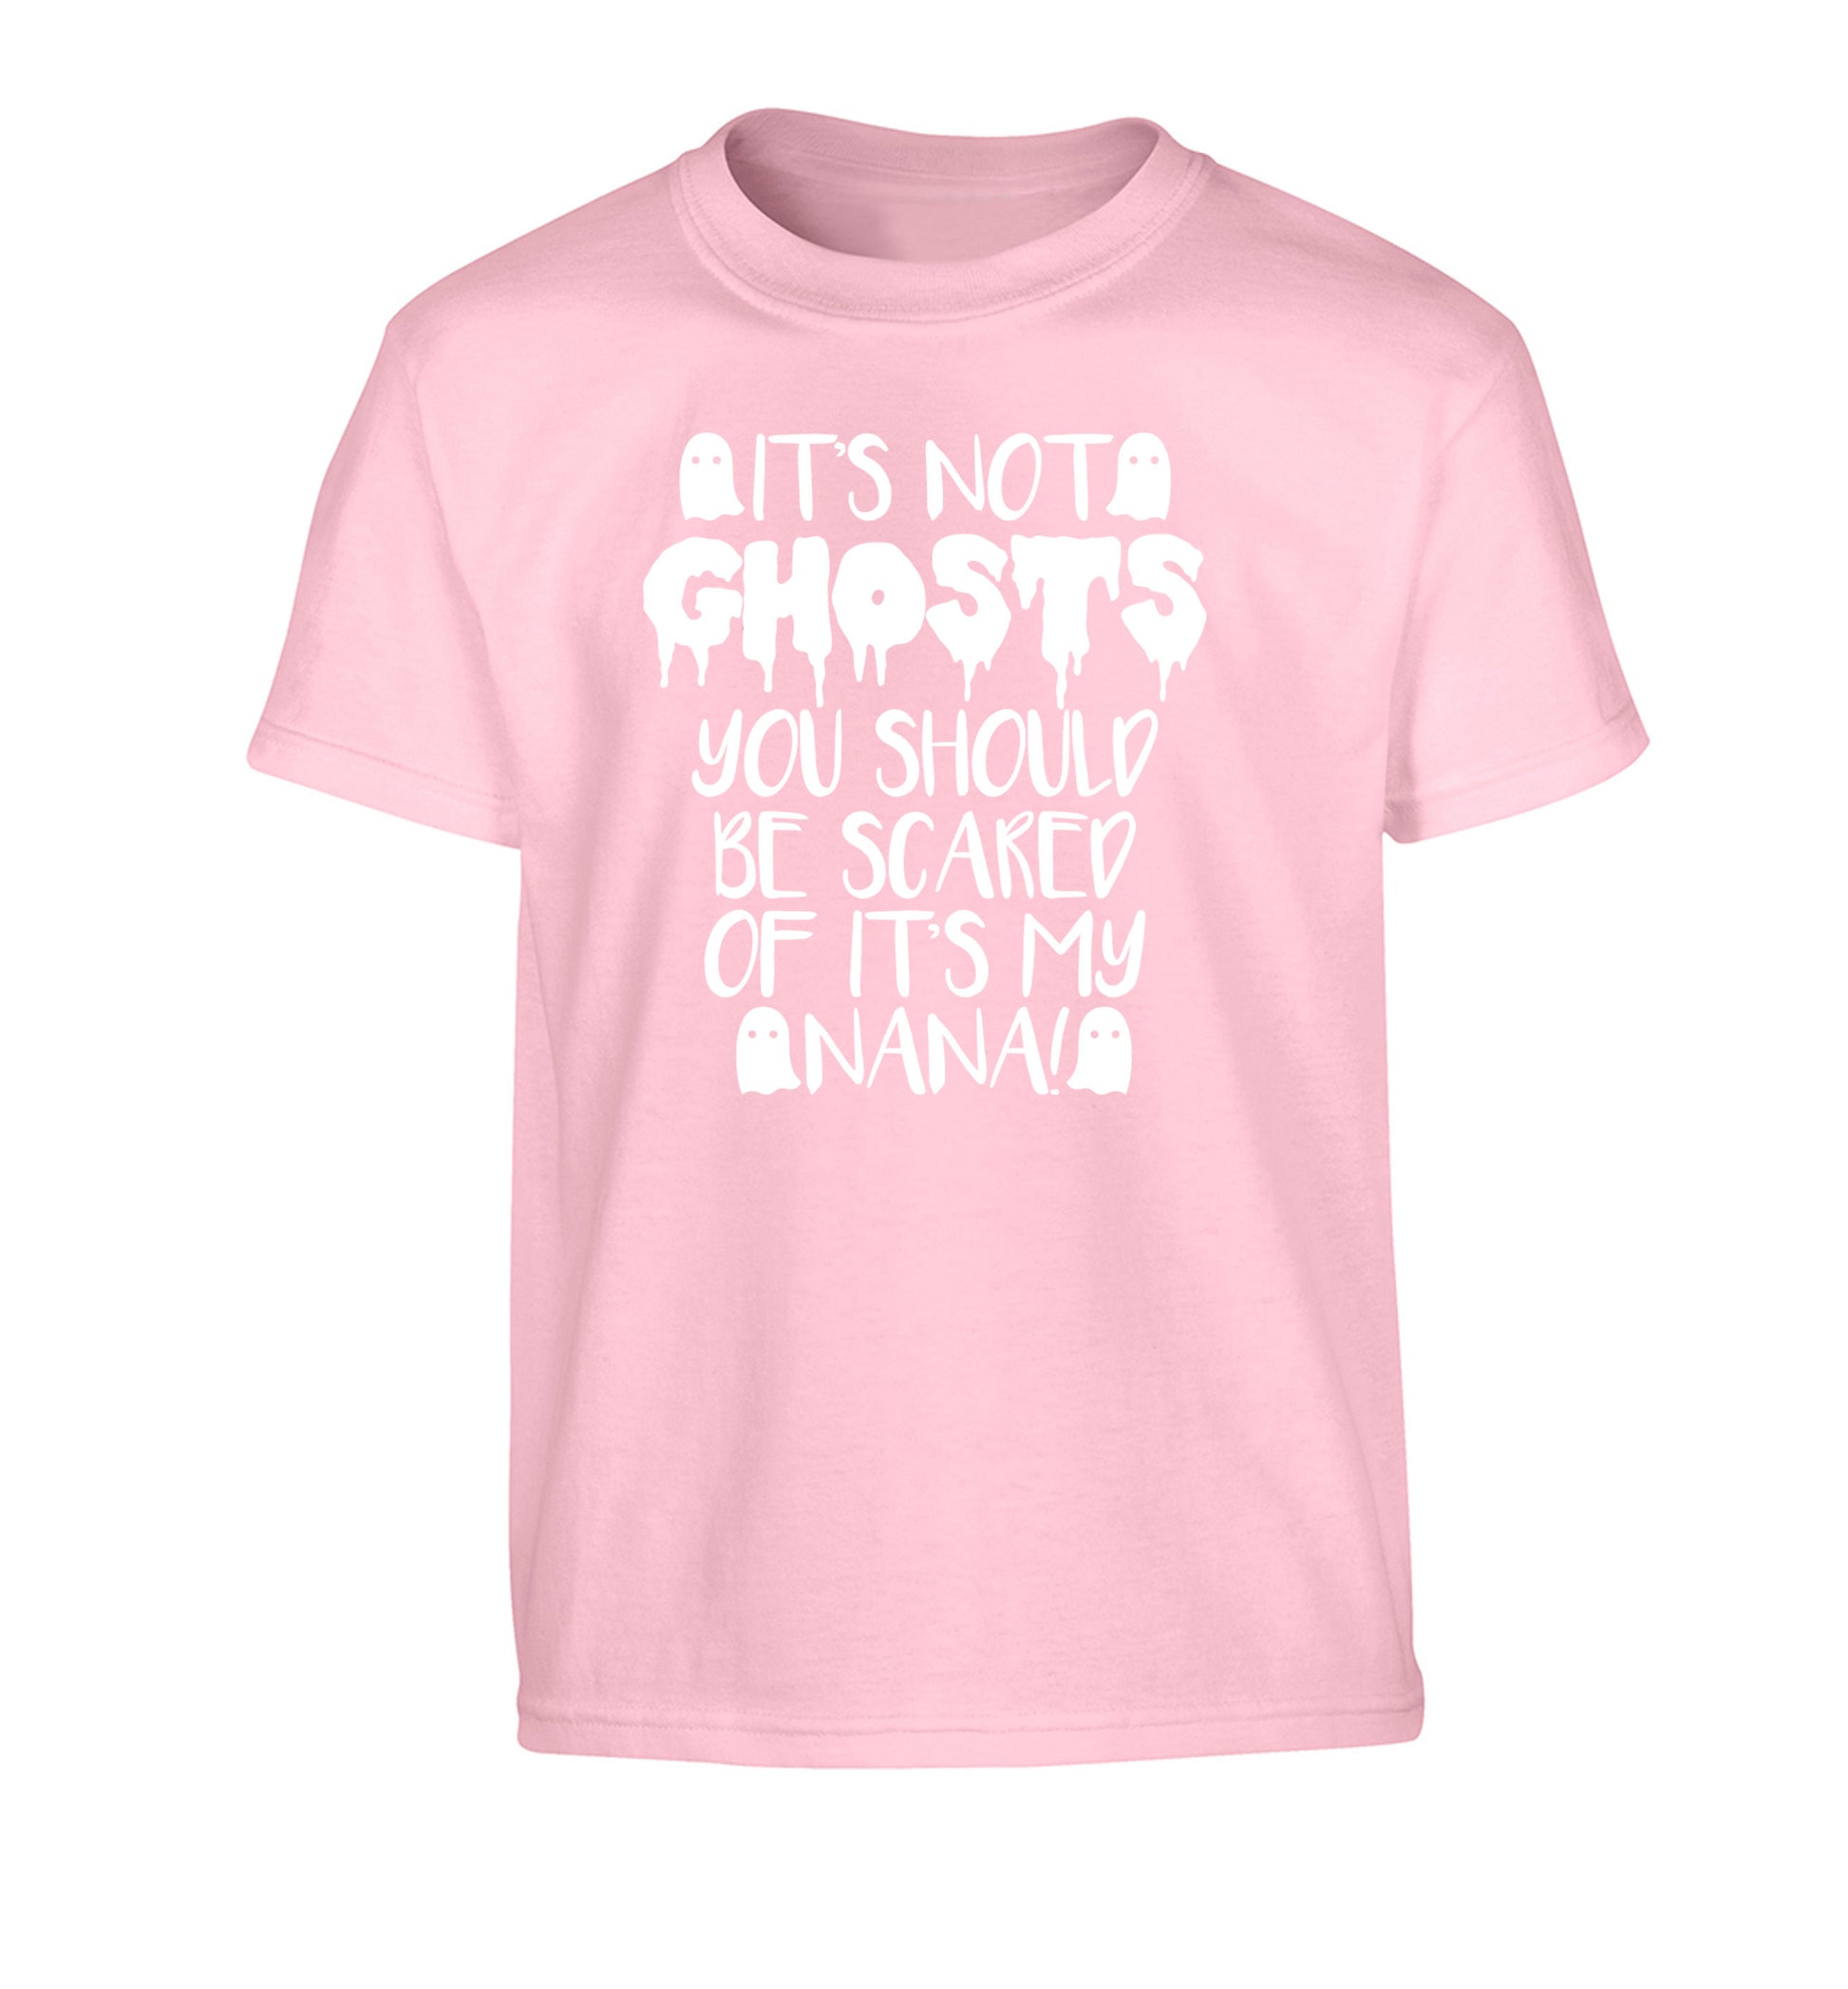 It's not ghosts you should be scared of it's my nana! Children's light pink Tshirt 12-14 Years